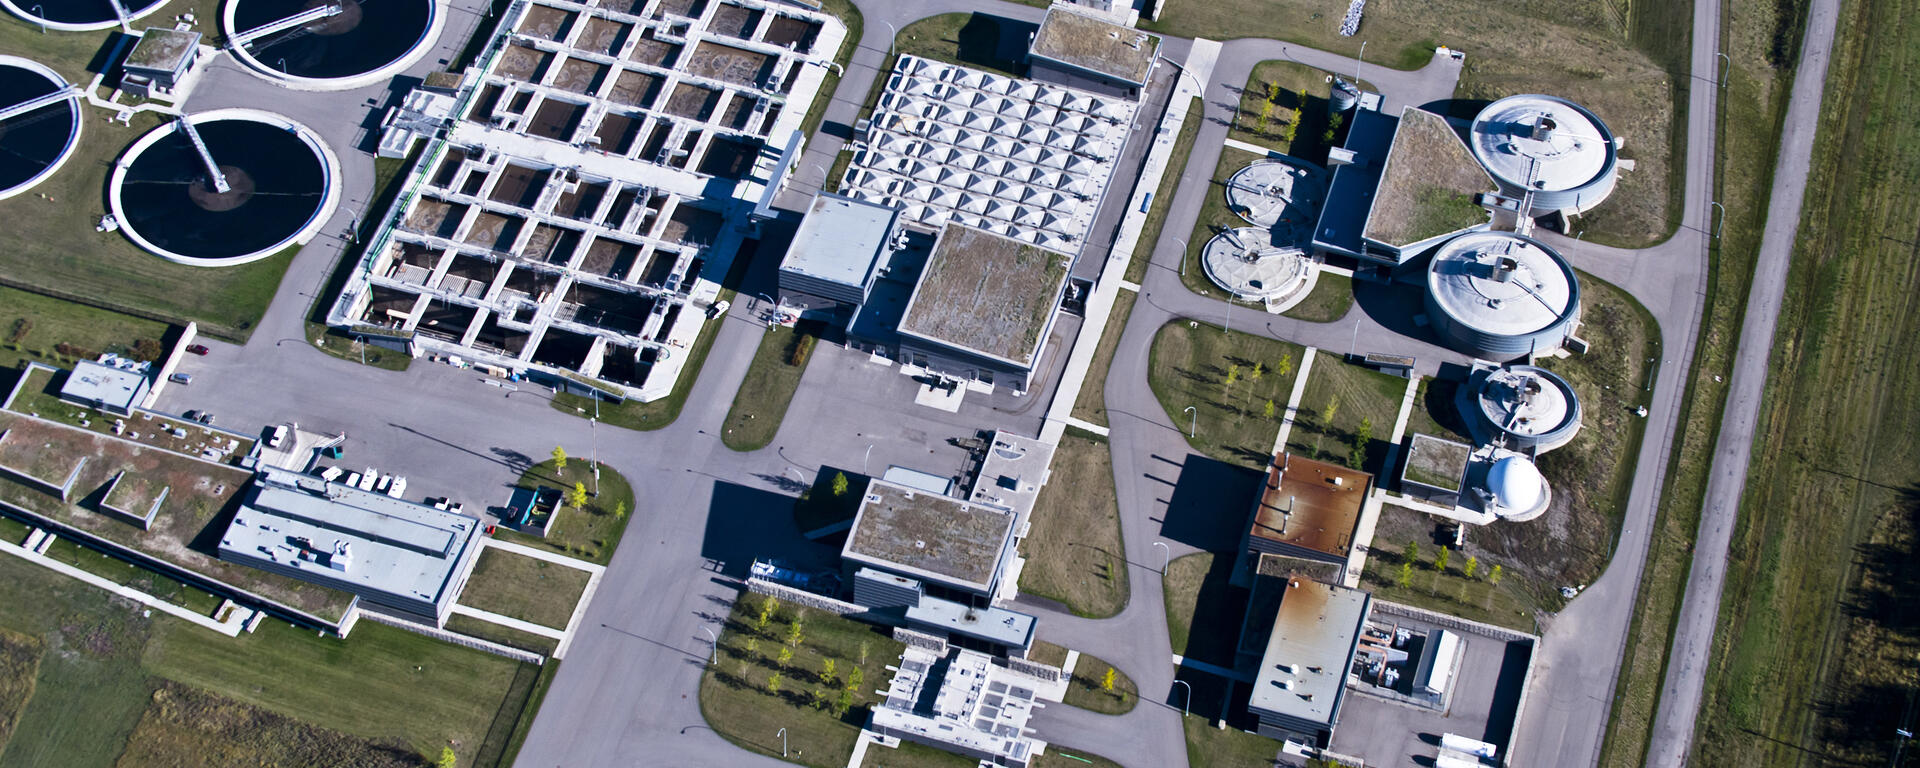 Advancing Canadian Water Assets (ACWA), UCalgary’s wastewater research facility, is one of the few facilities in Canada with the capability to do the work required for wastewater monitoring for opioids.